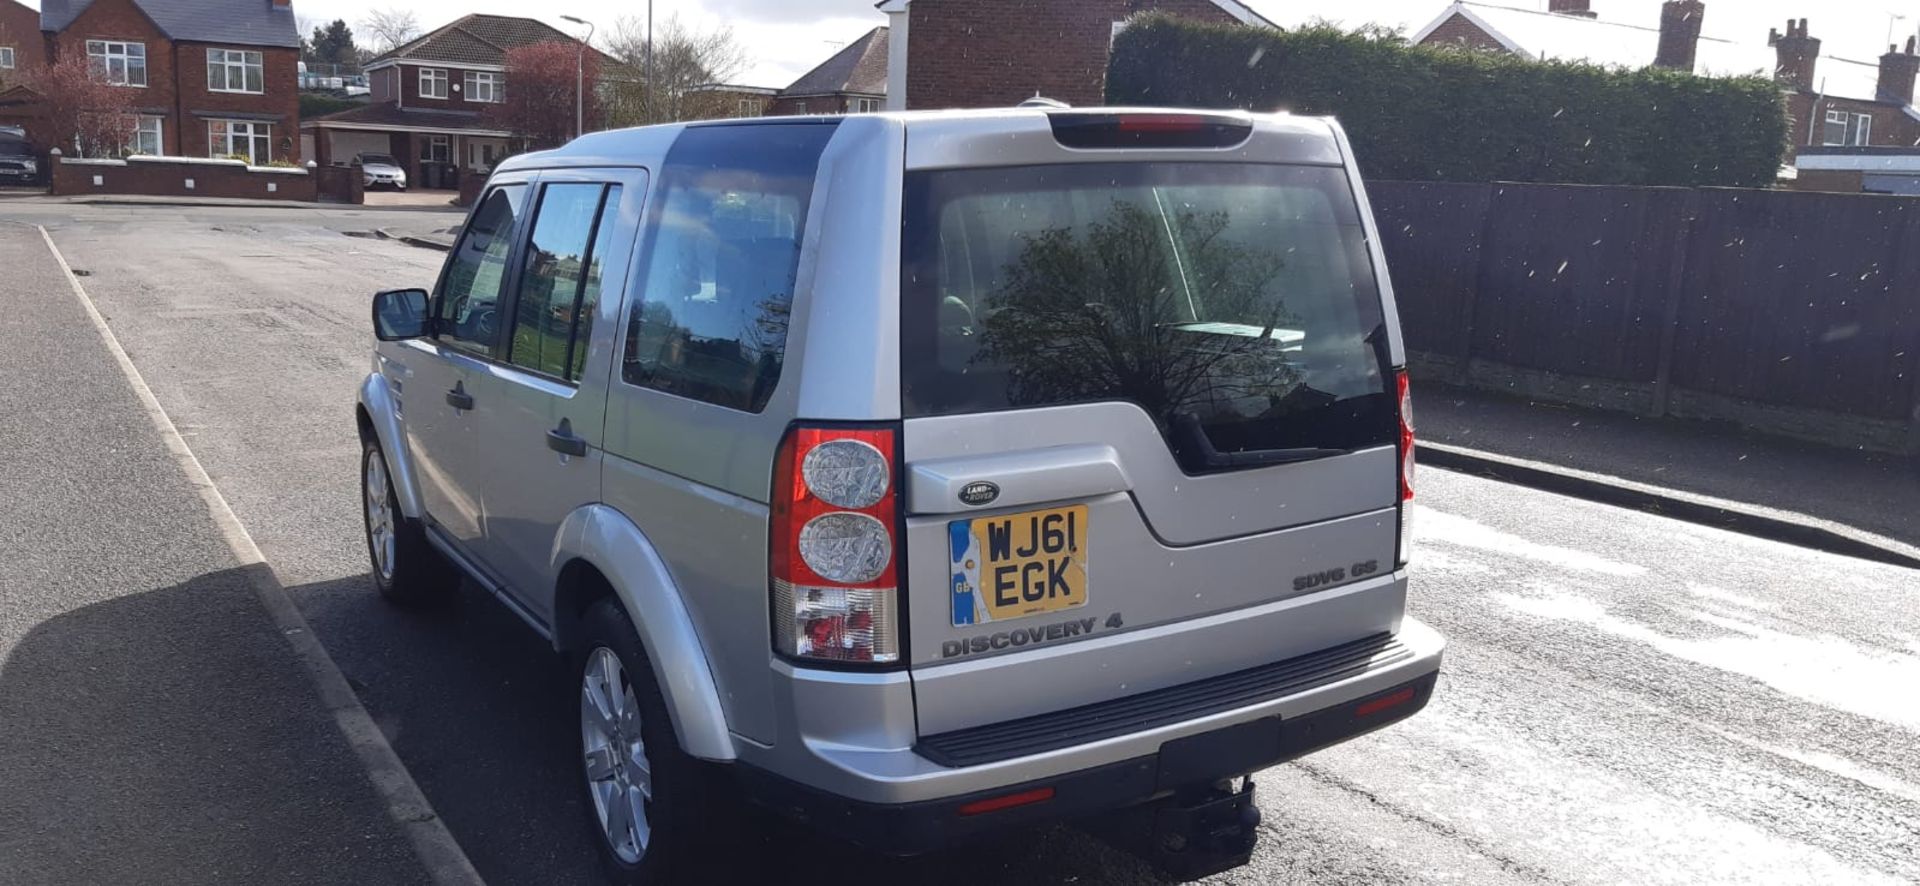 LAND ROVER DISCOVERY GS SDV6 AUTO 7 SEATER SILVER ESTATE, 127K MILES *NO VAT* - Image 7 of 16